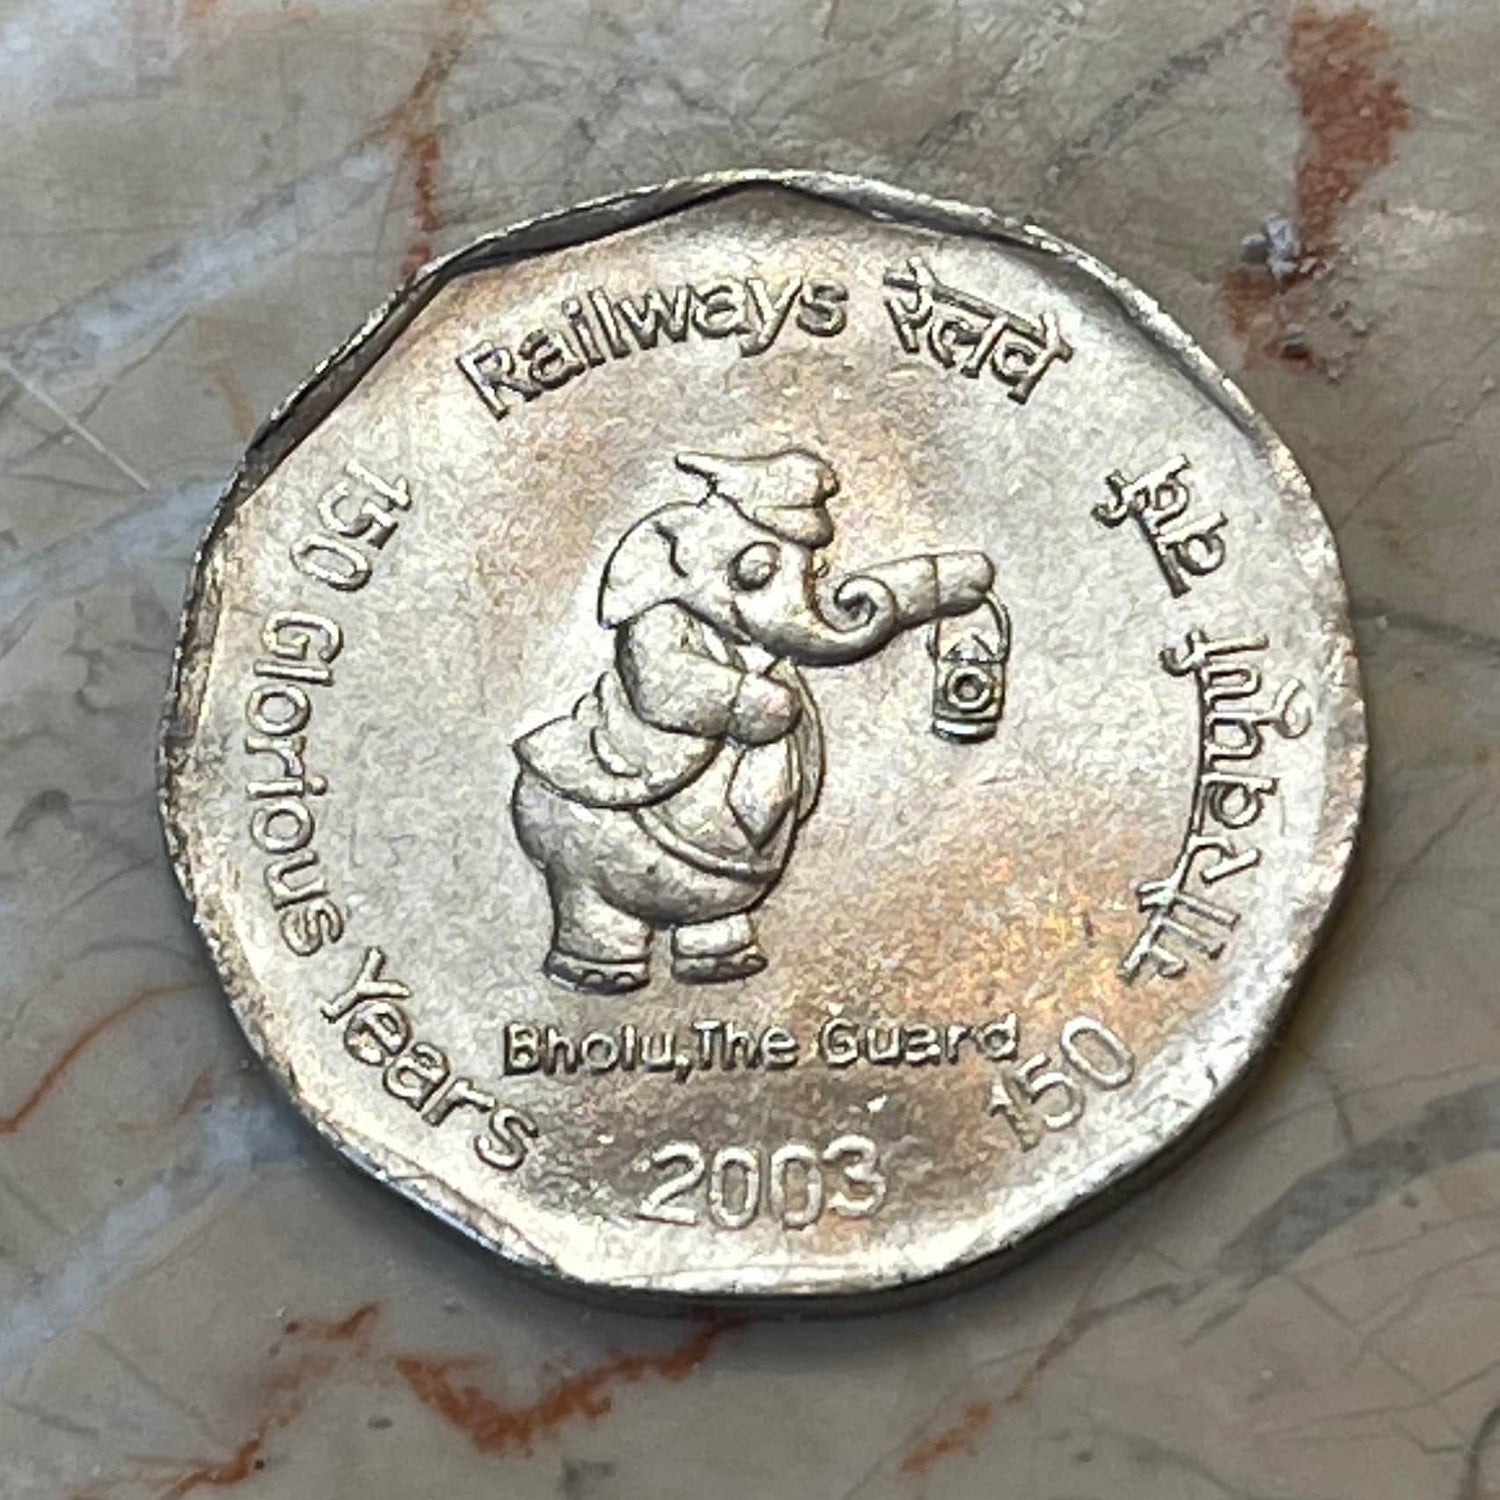 Bholu Elephant Railway Mascot & Ashoka Lion Capitol 2 Rupees India Authentic Coin Money for Jewelry and Craft Making